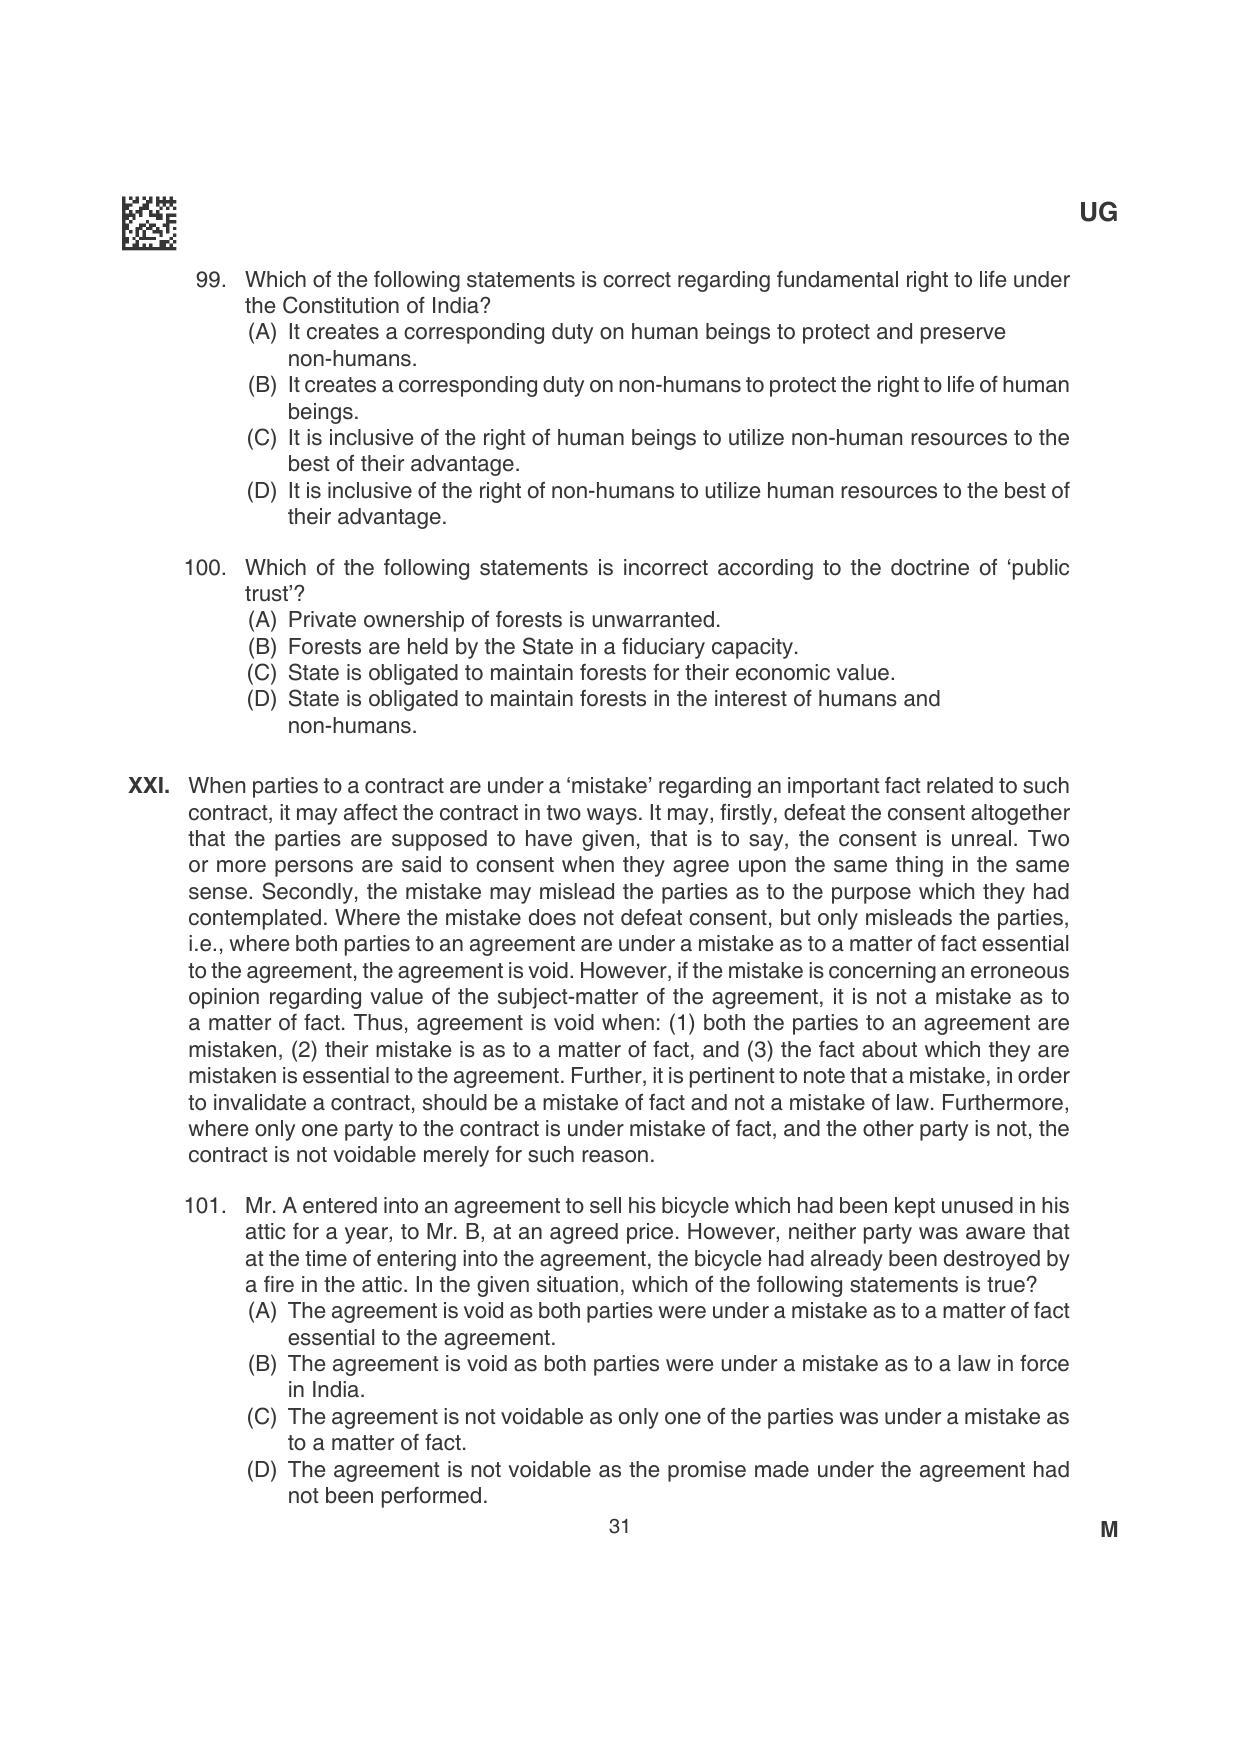 CLAT 2022 UG Question Papers - Page 31